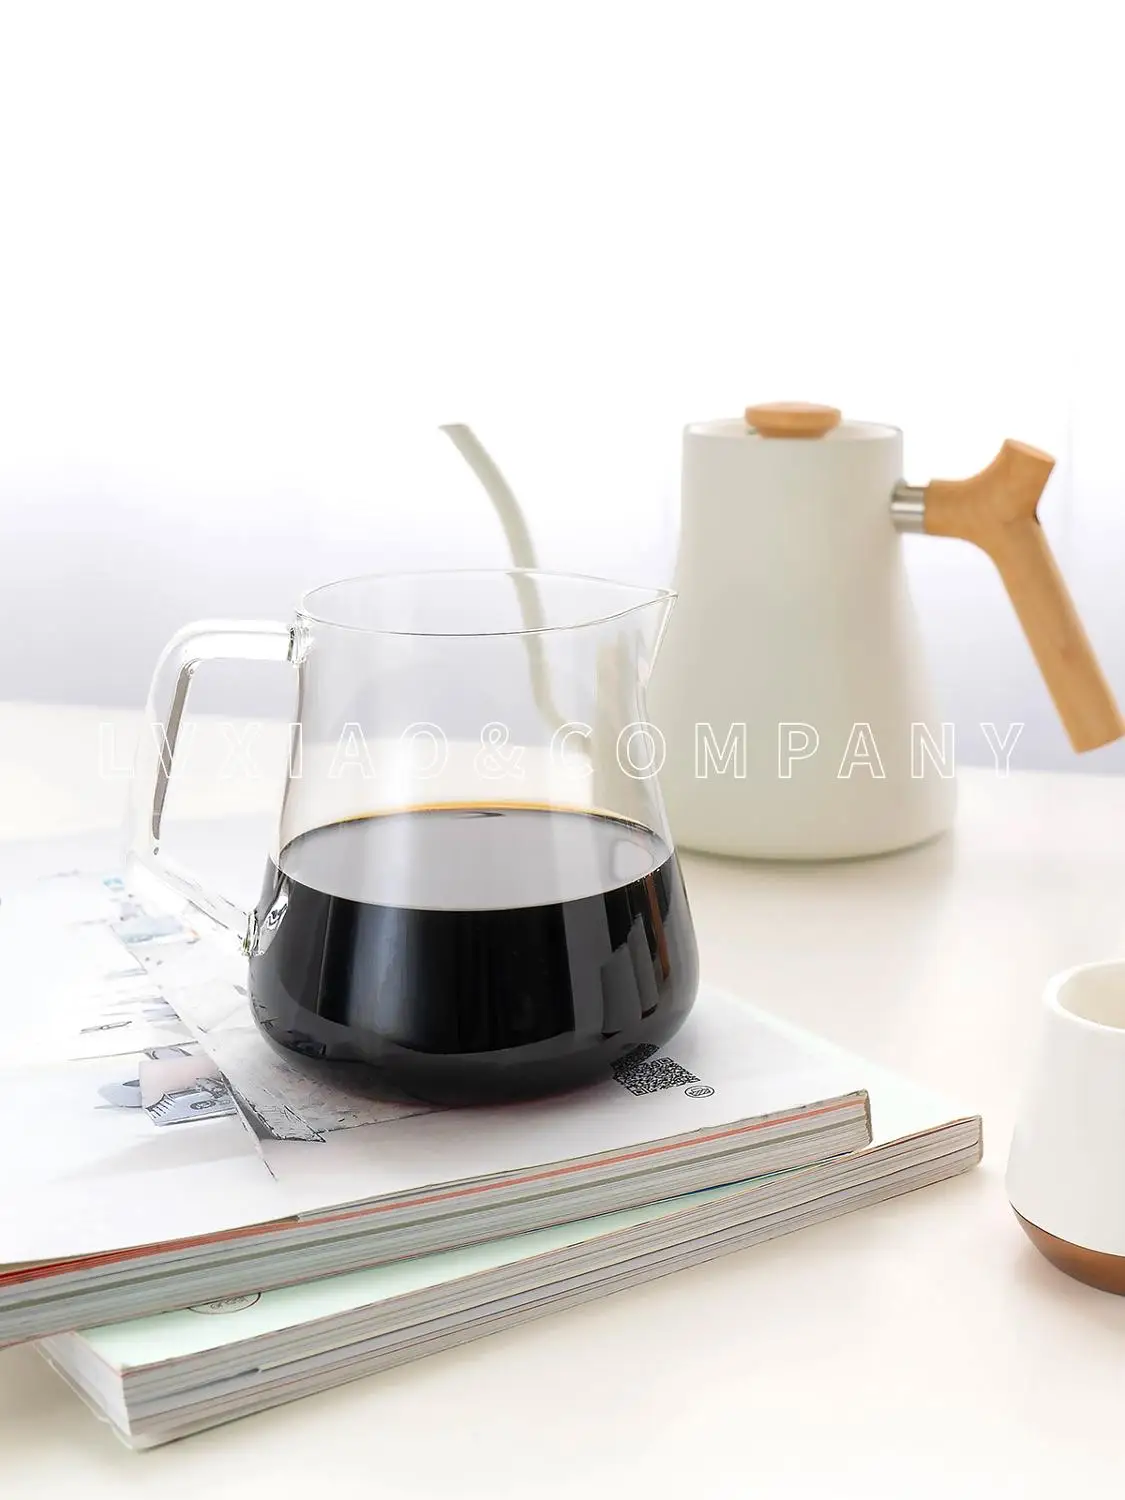 https://ae01.alicdn.com/kf/H04bd34e3ec884b8386d282900ec9842d6/Fellow-Mighty-Small-Glass-Serving-Carafe-for-Coffee-Tea-No-Drip-Spout-Sturdy-Handle-Smoke-Grey.jpg